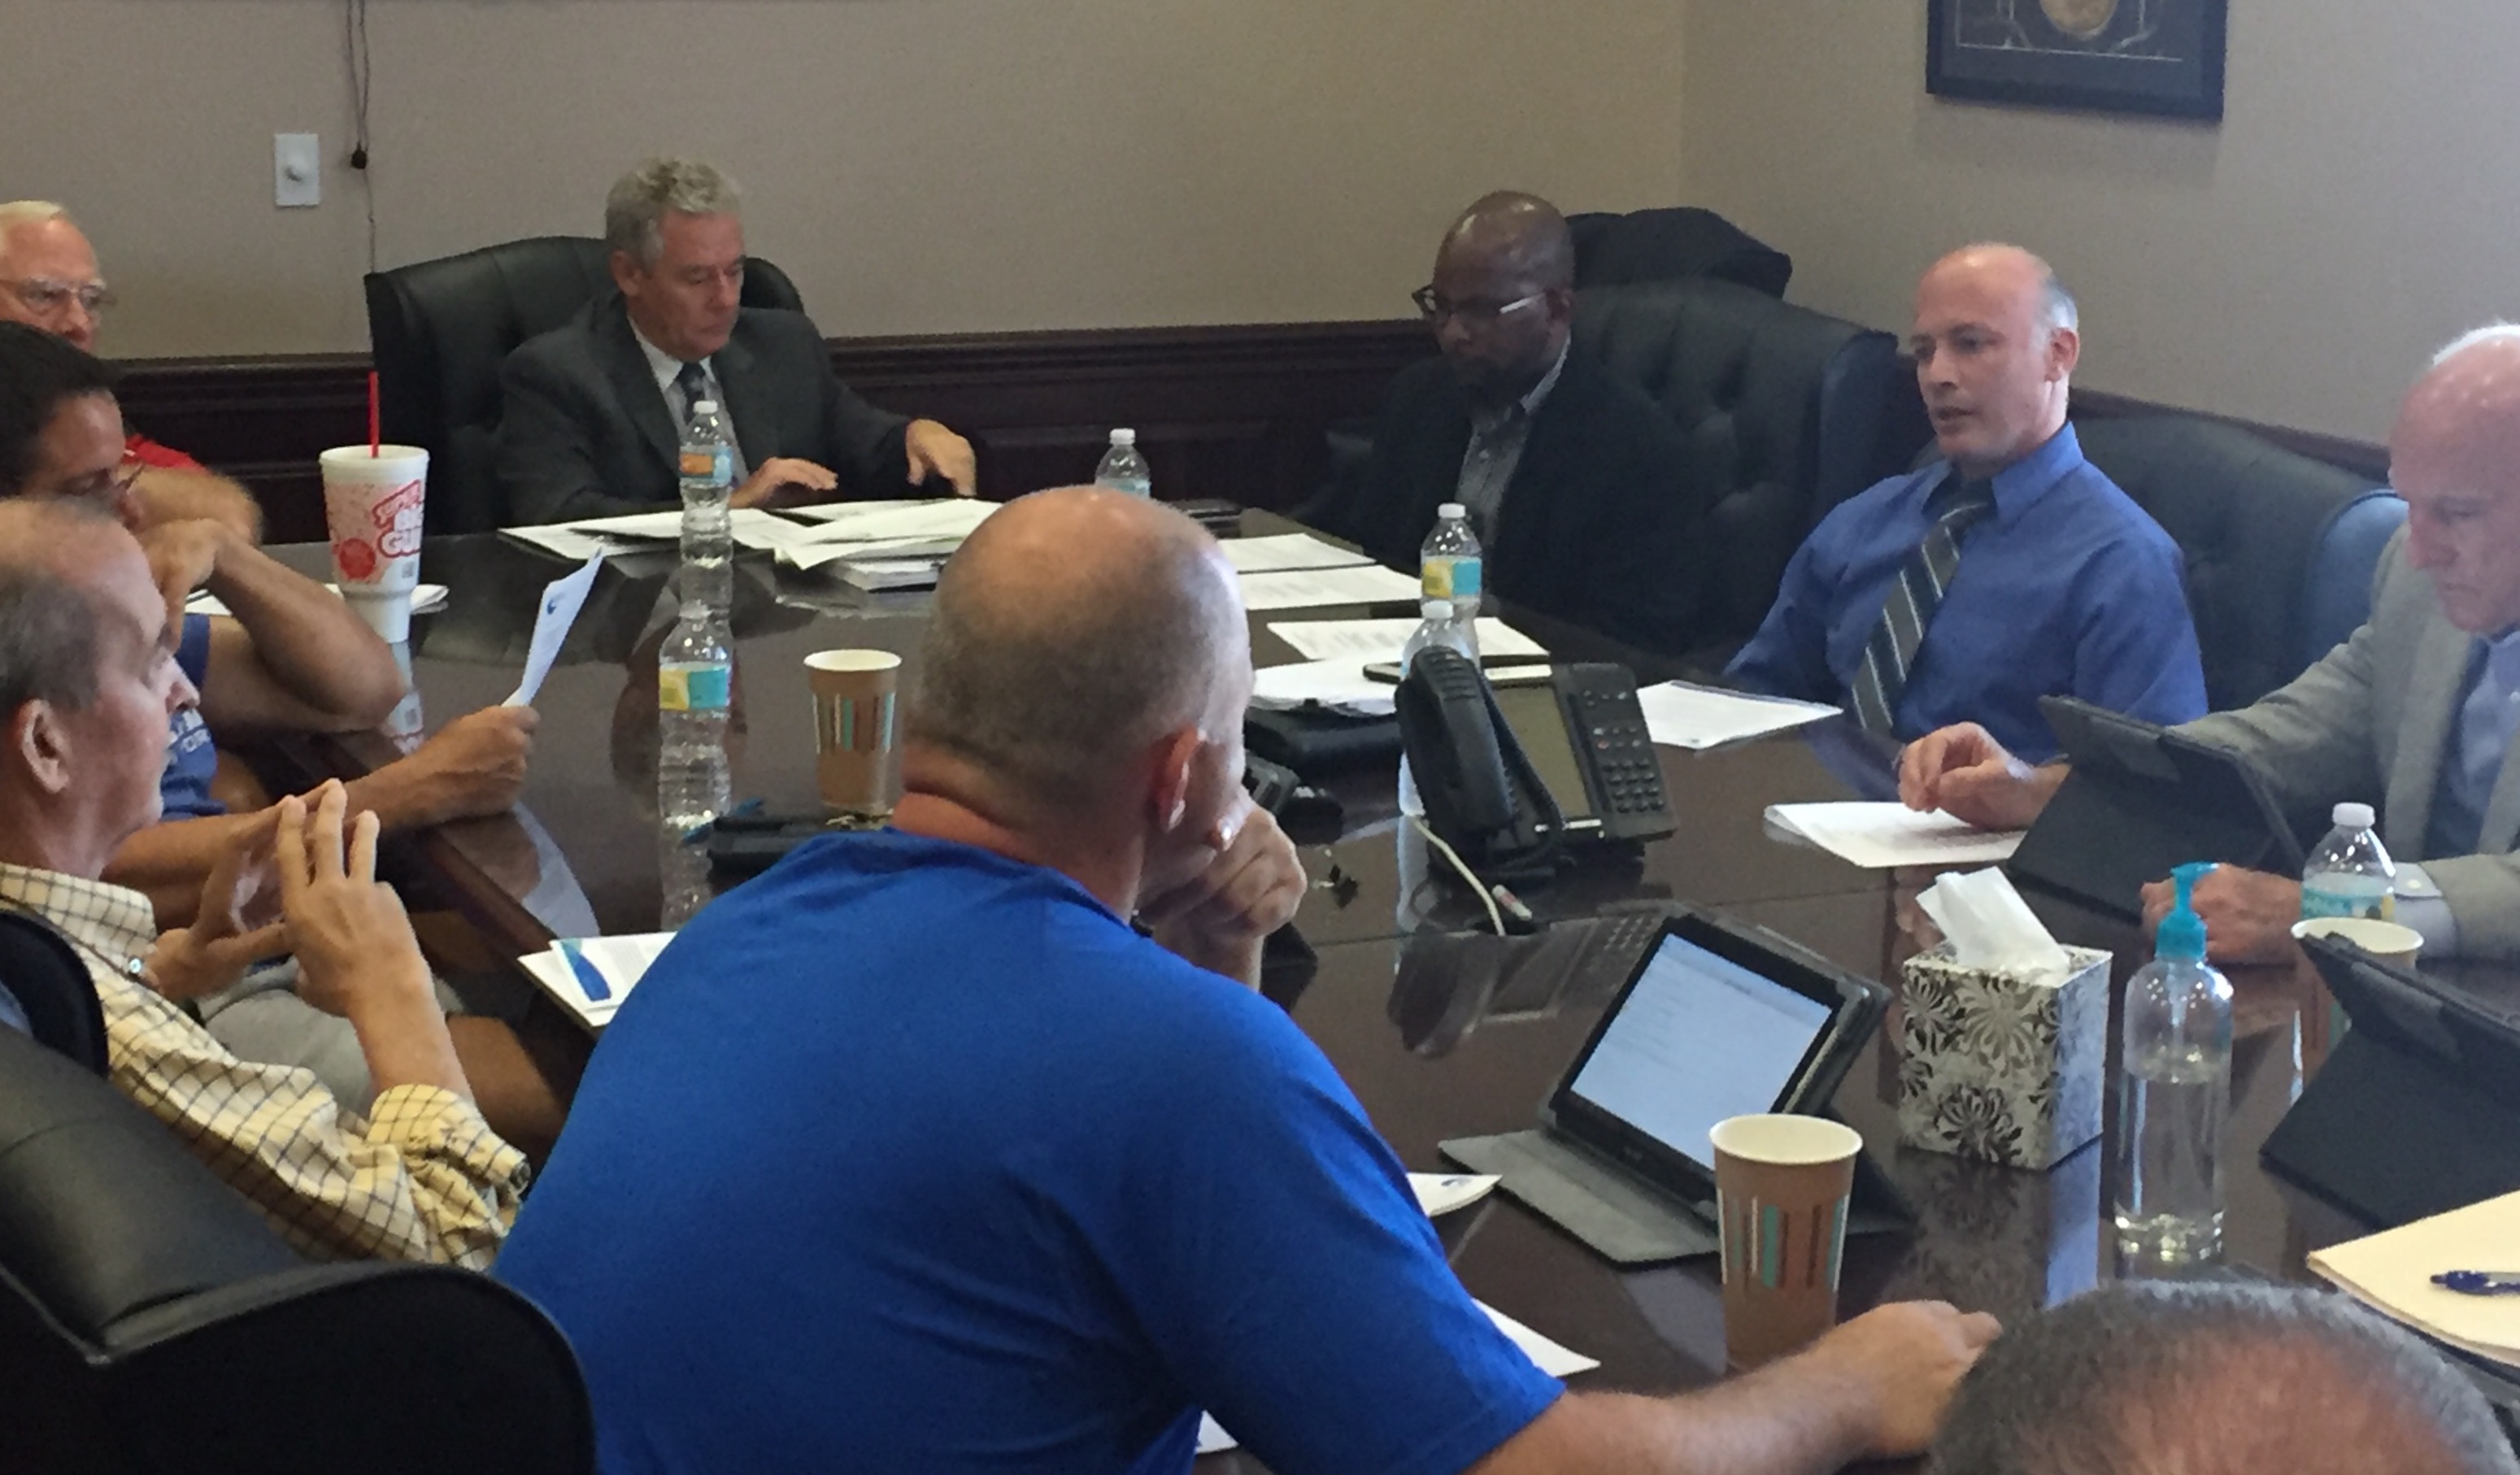 The Board of Trustees held a special meeting on May 26, 2017 to review the rate of return assumption rate. All stakeholders had a seat at the table and lively discussion ensued. After hearing from all parties, Mr. White (Board Trustees) made a motion